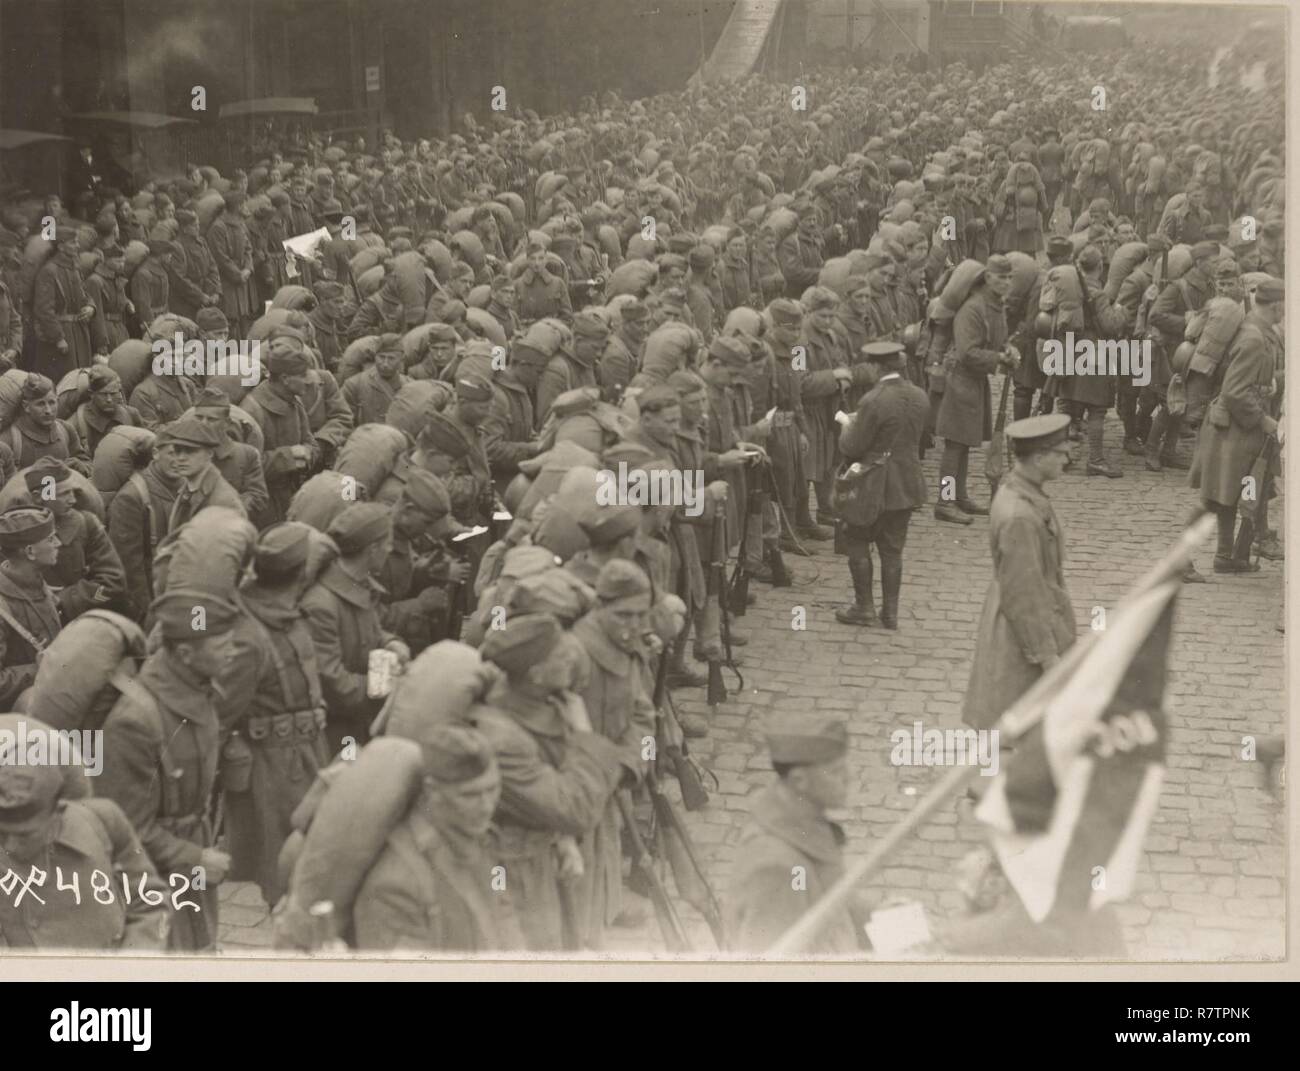 Soldiers from the 308th Infantry Regiment of the 77th Division, a unit made uip of New York City draftees, who had been part of the 'Lost Battalion' in October 1918 in Hoboken, New Jersey on April 29, 1919 after returning from France. 540 members of the unit were trapped behind German lines from October 2 to October 8. 1918 and 170 died. Stock Photo